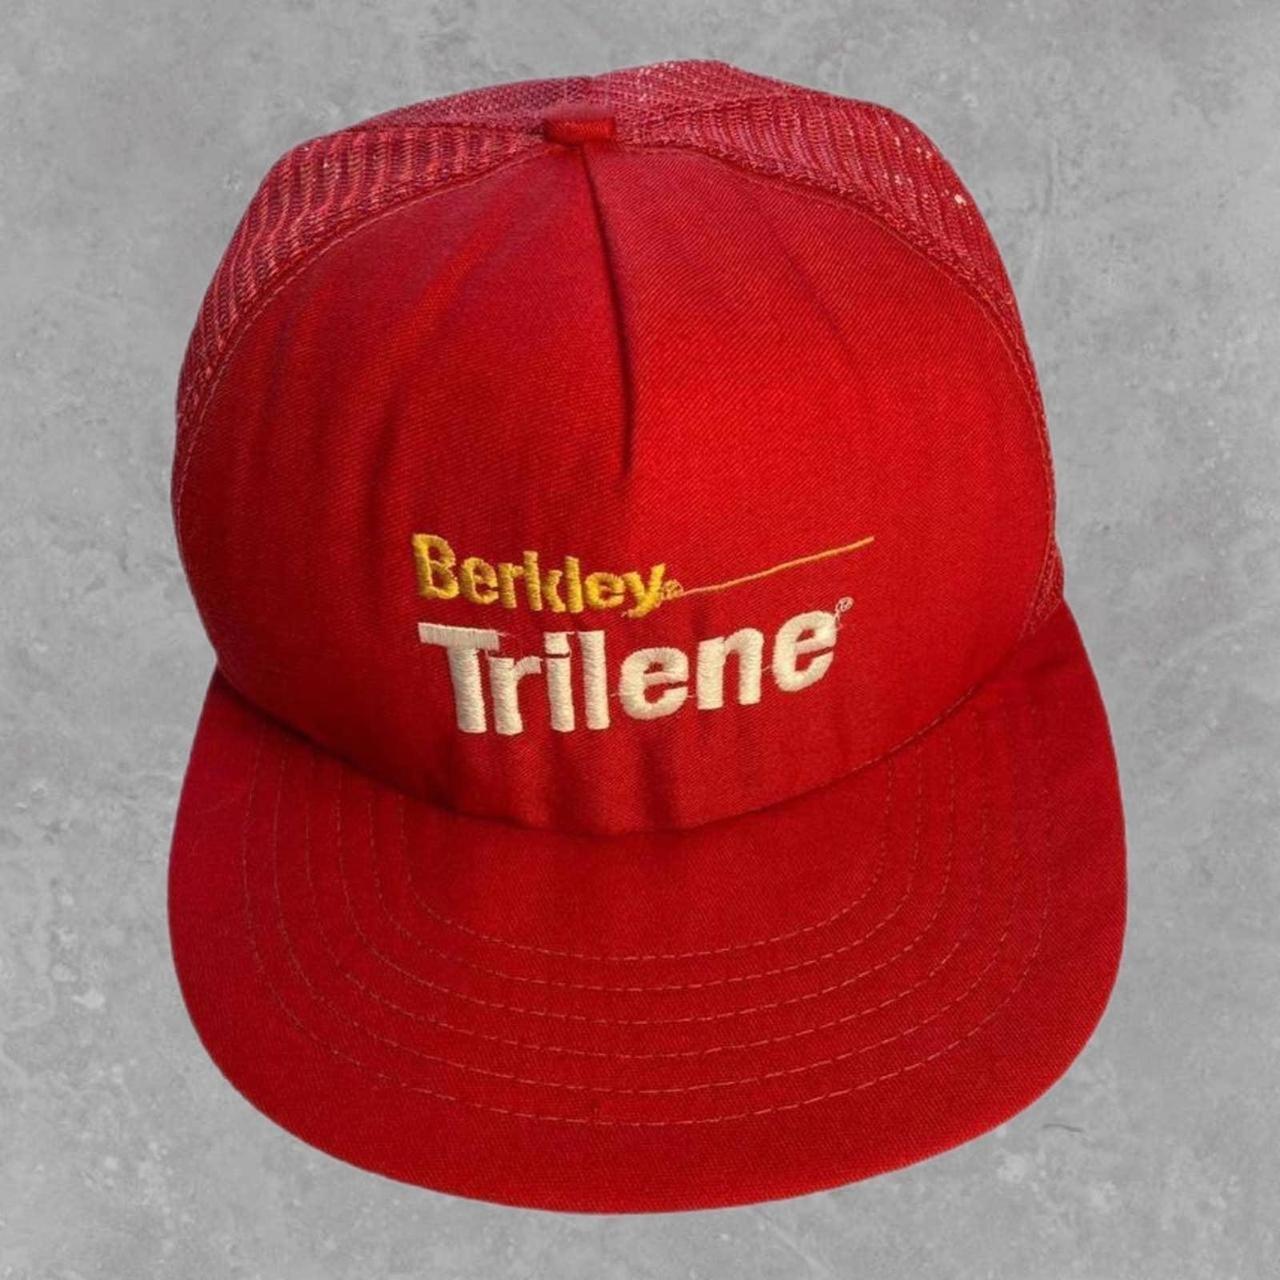 Vintage Red Trucker Hat About this item: This is a - Depop